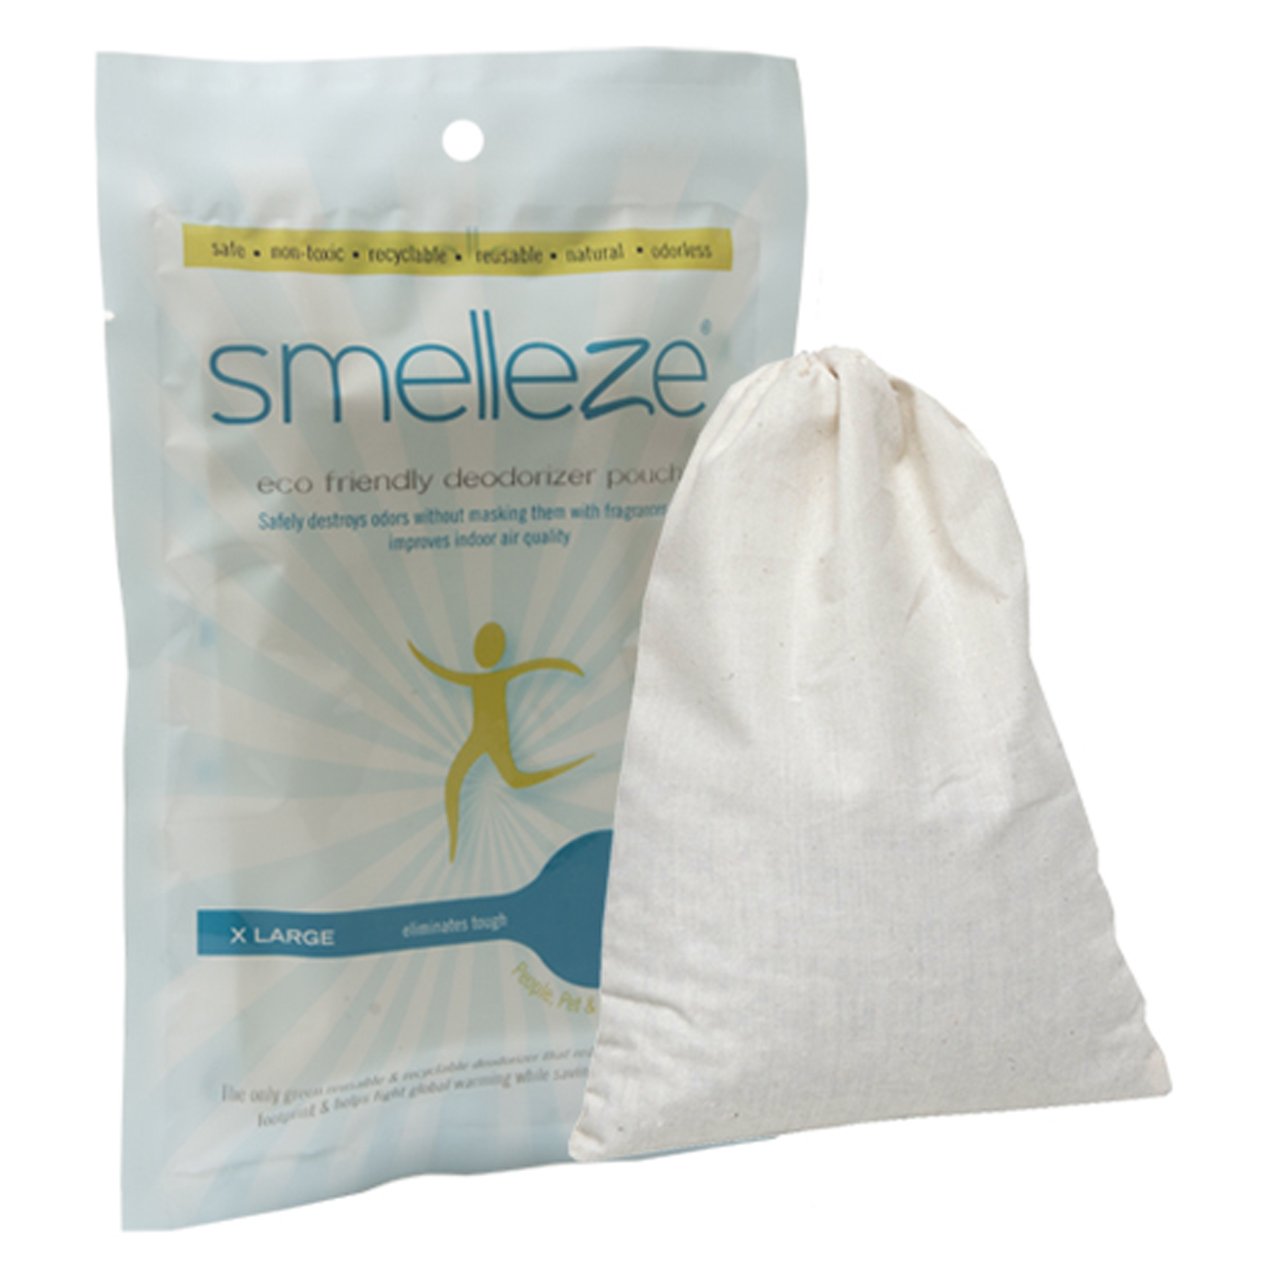 Smelleze Reusable Laundry Smell Removal Deodorizer Pouch: Removes Clothes Stench Without Scents 23200